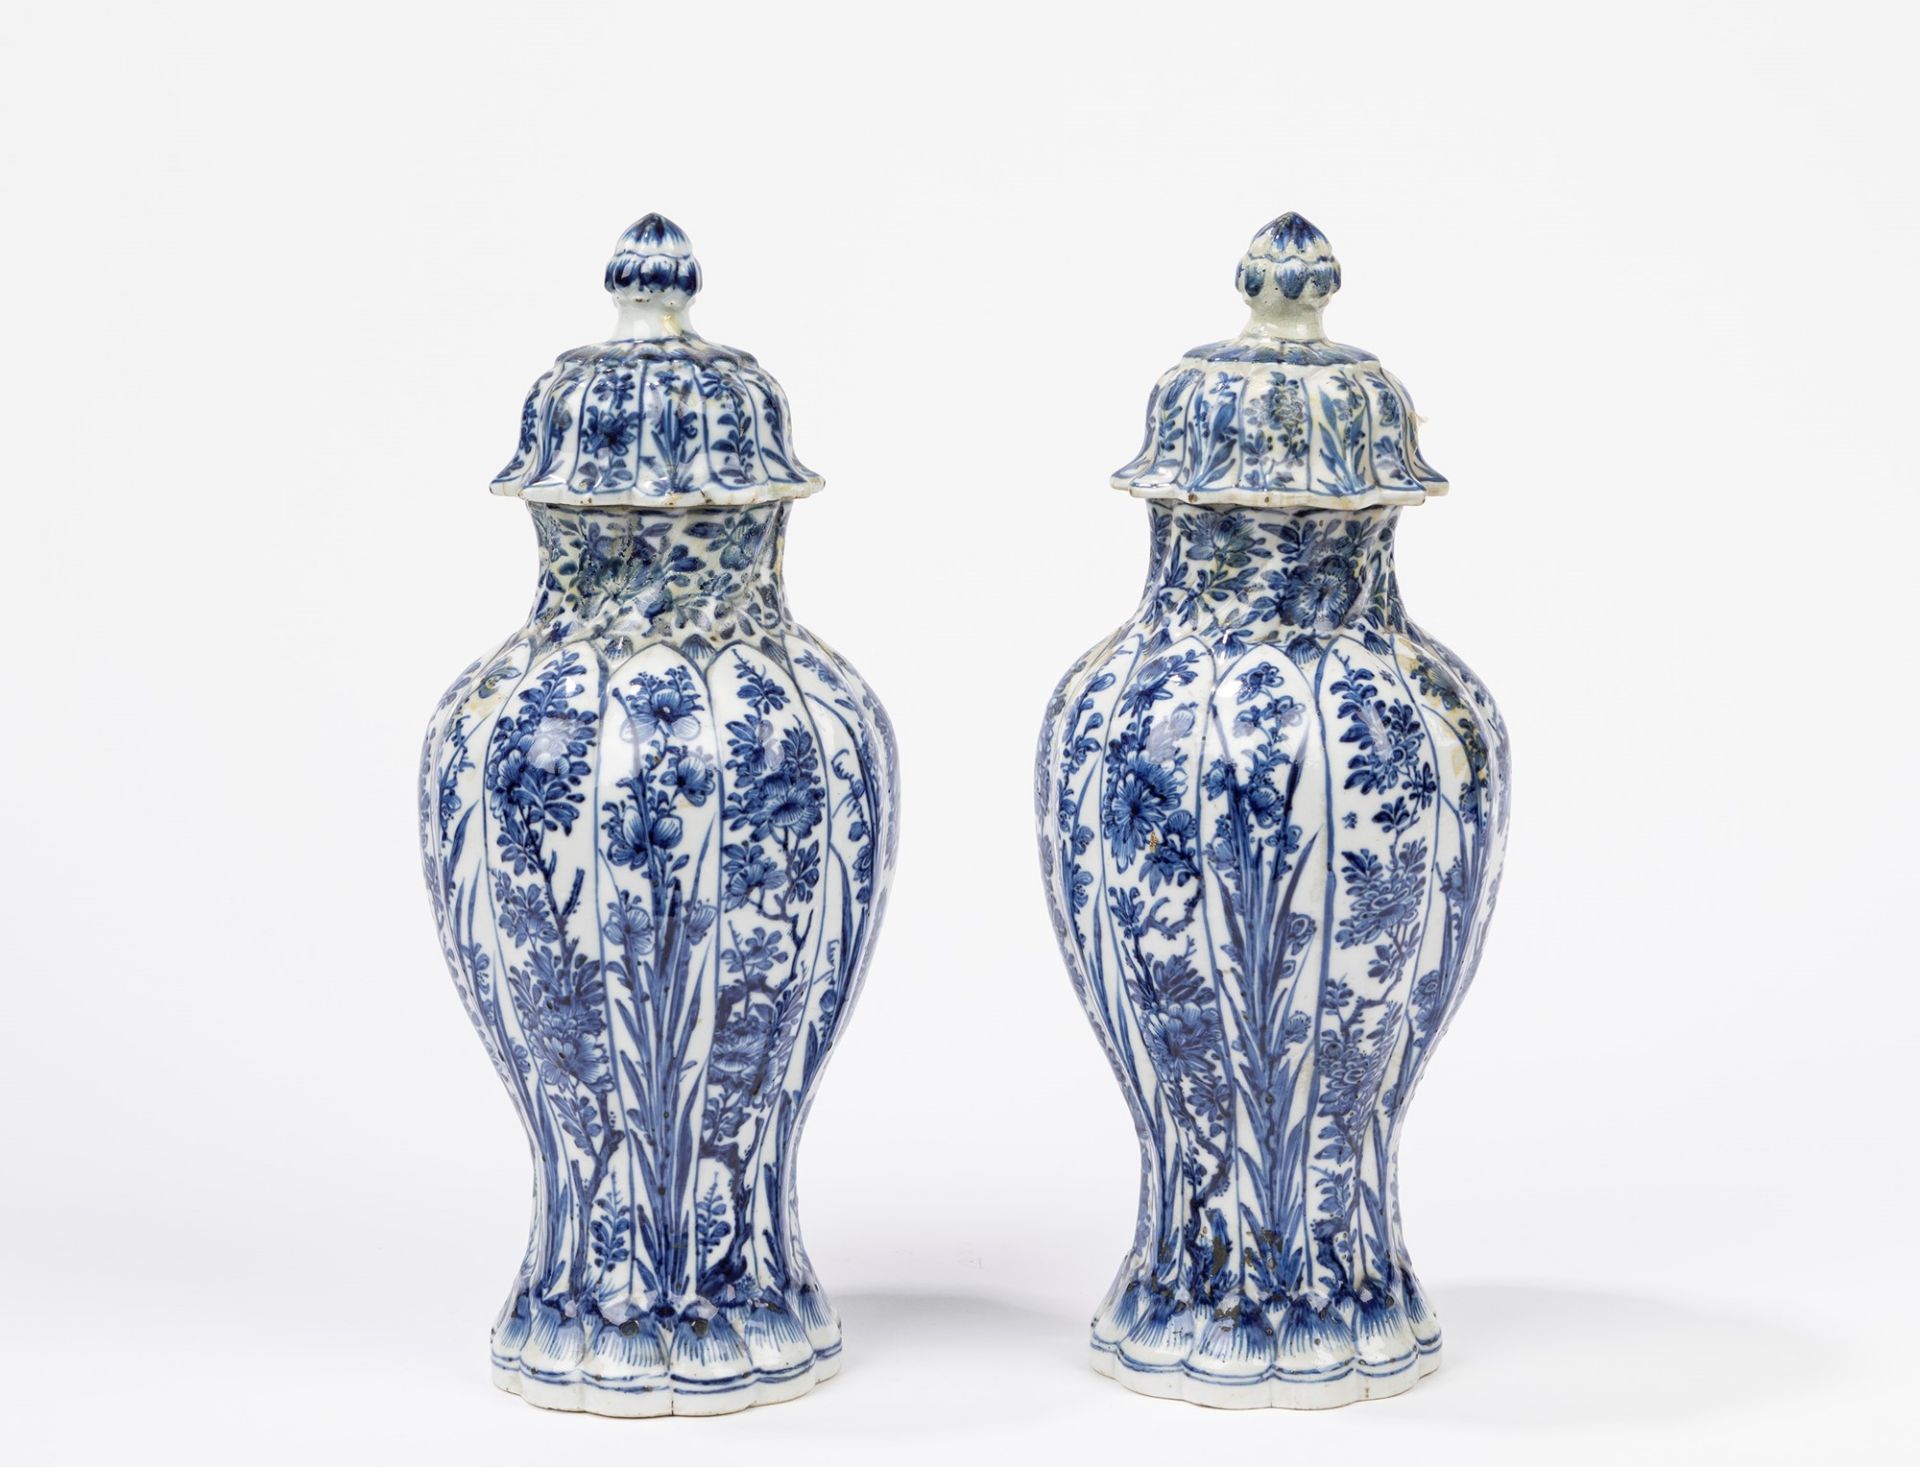 Pair of blue and white porcelain jars with lids, Delft 18th century